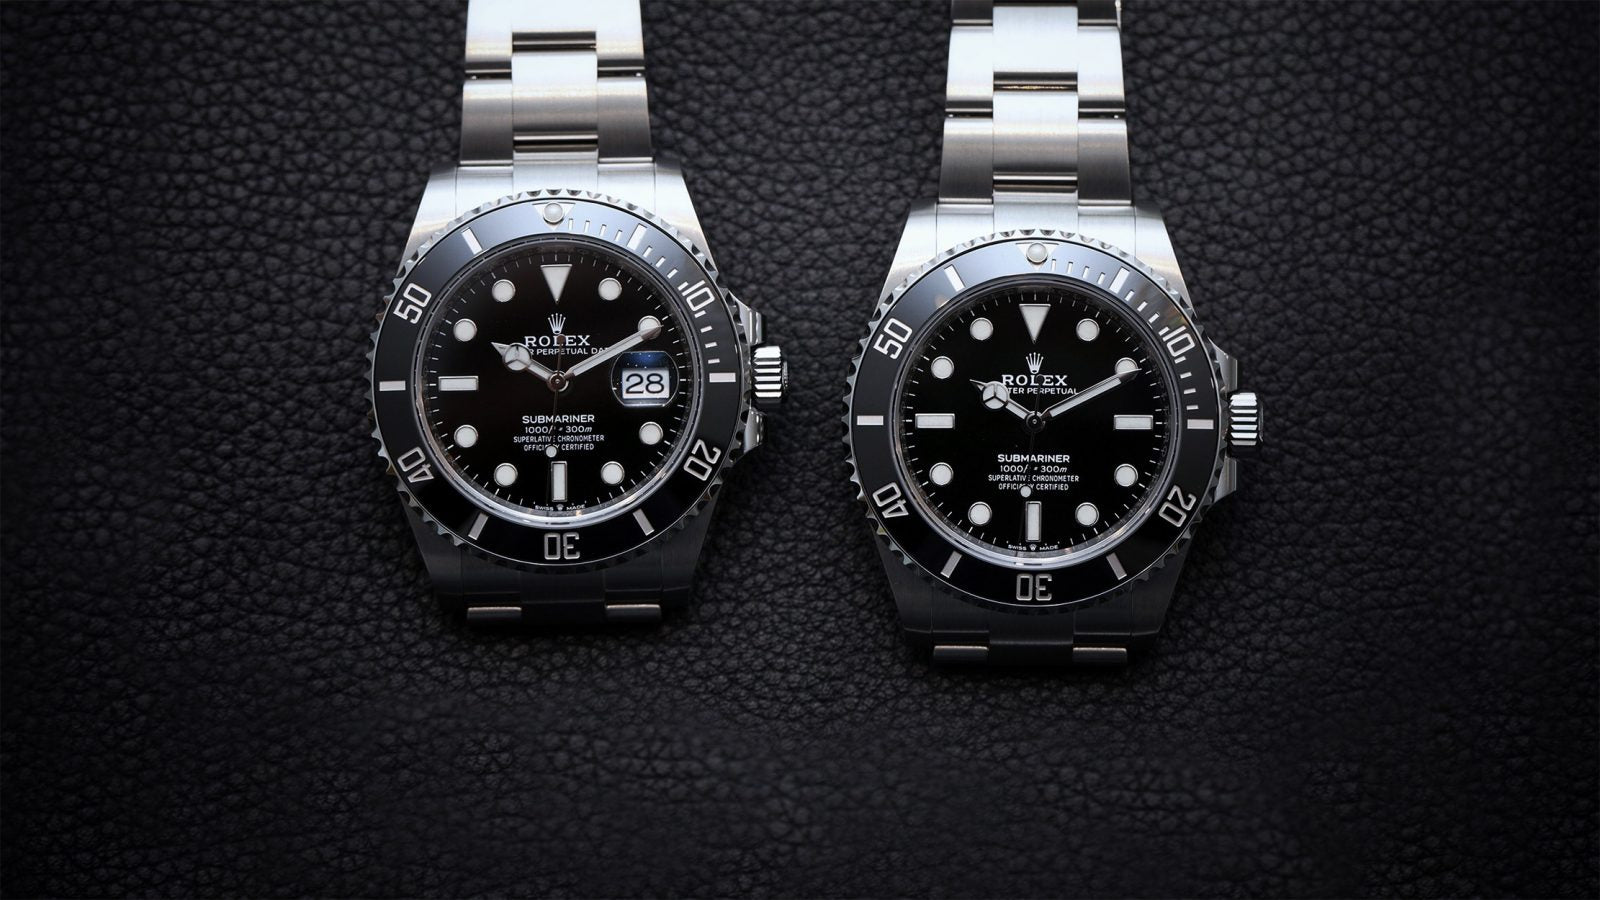 Submariner Date and No-Date models